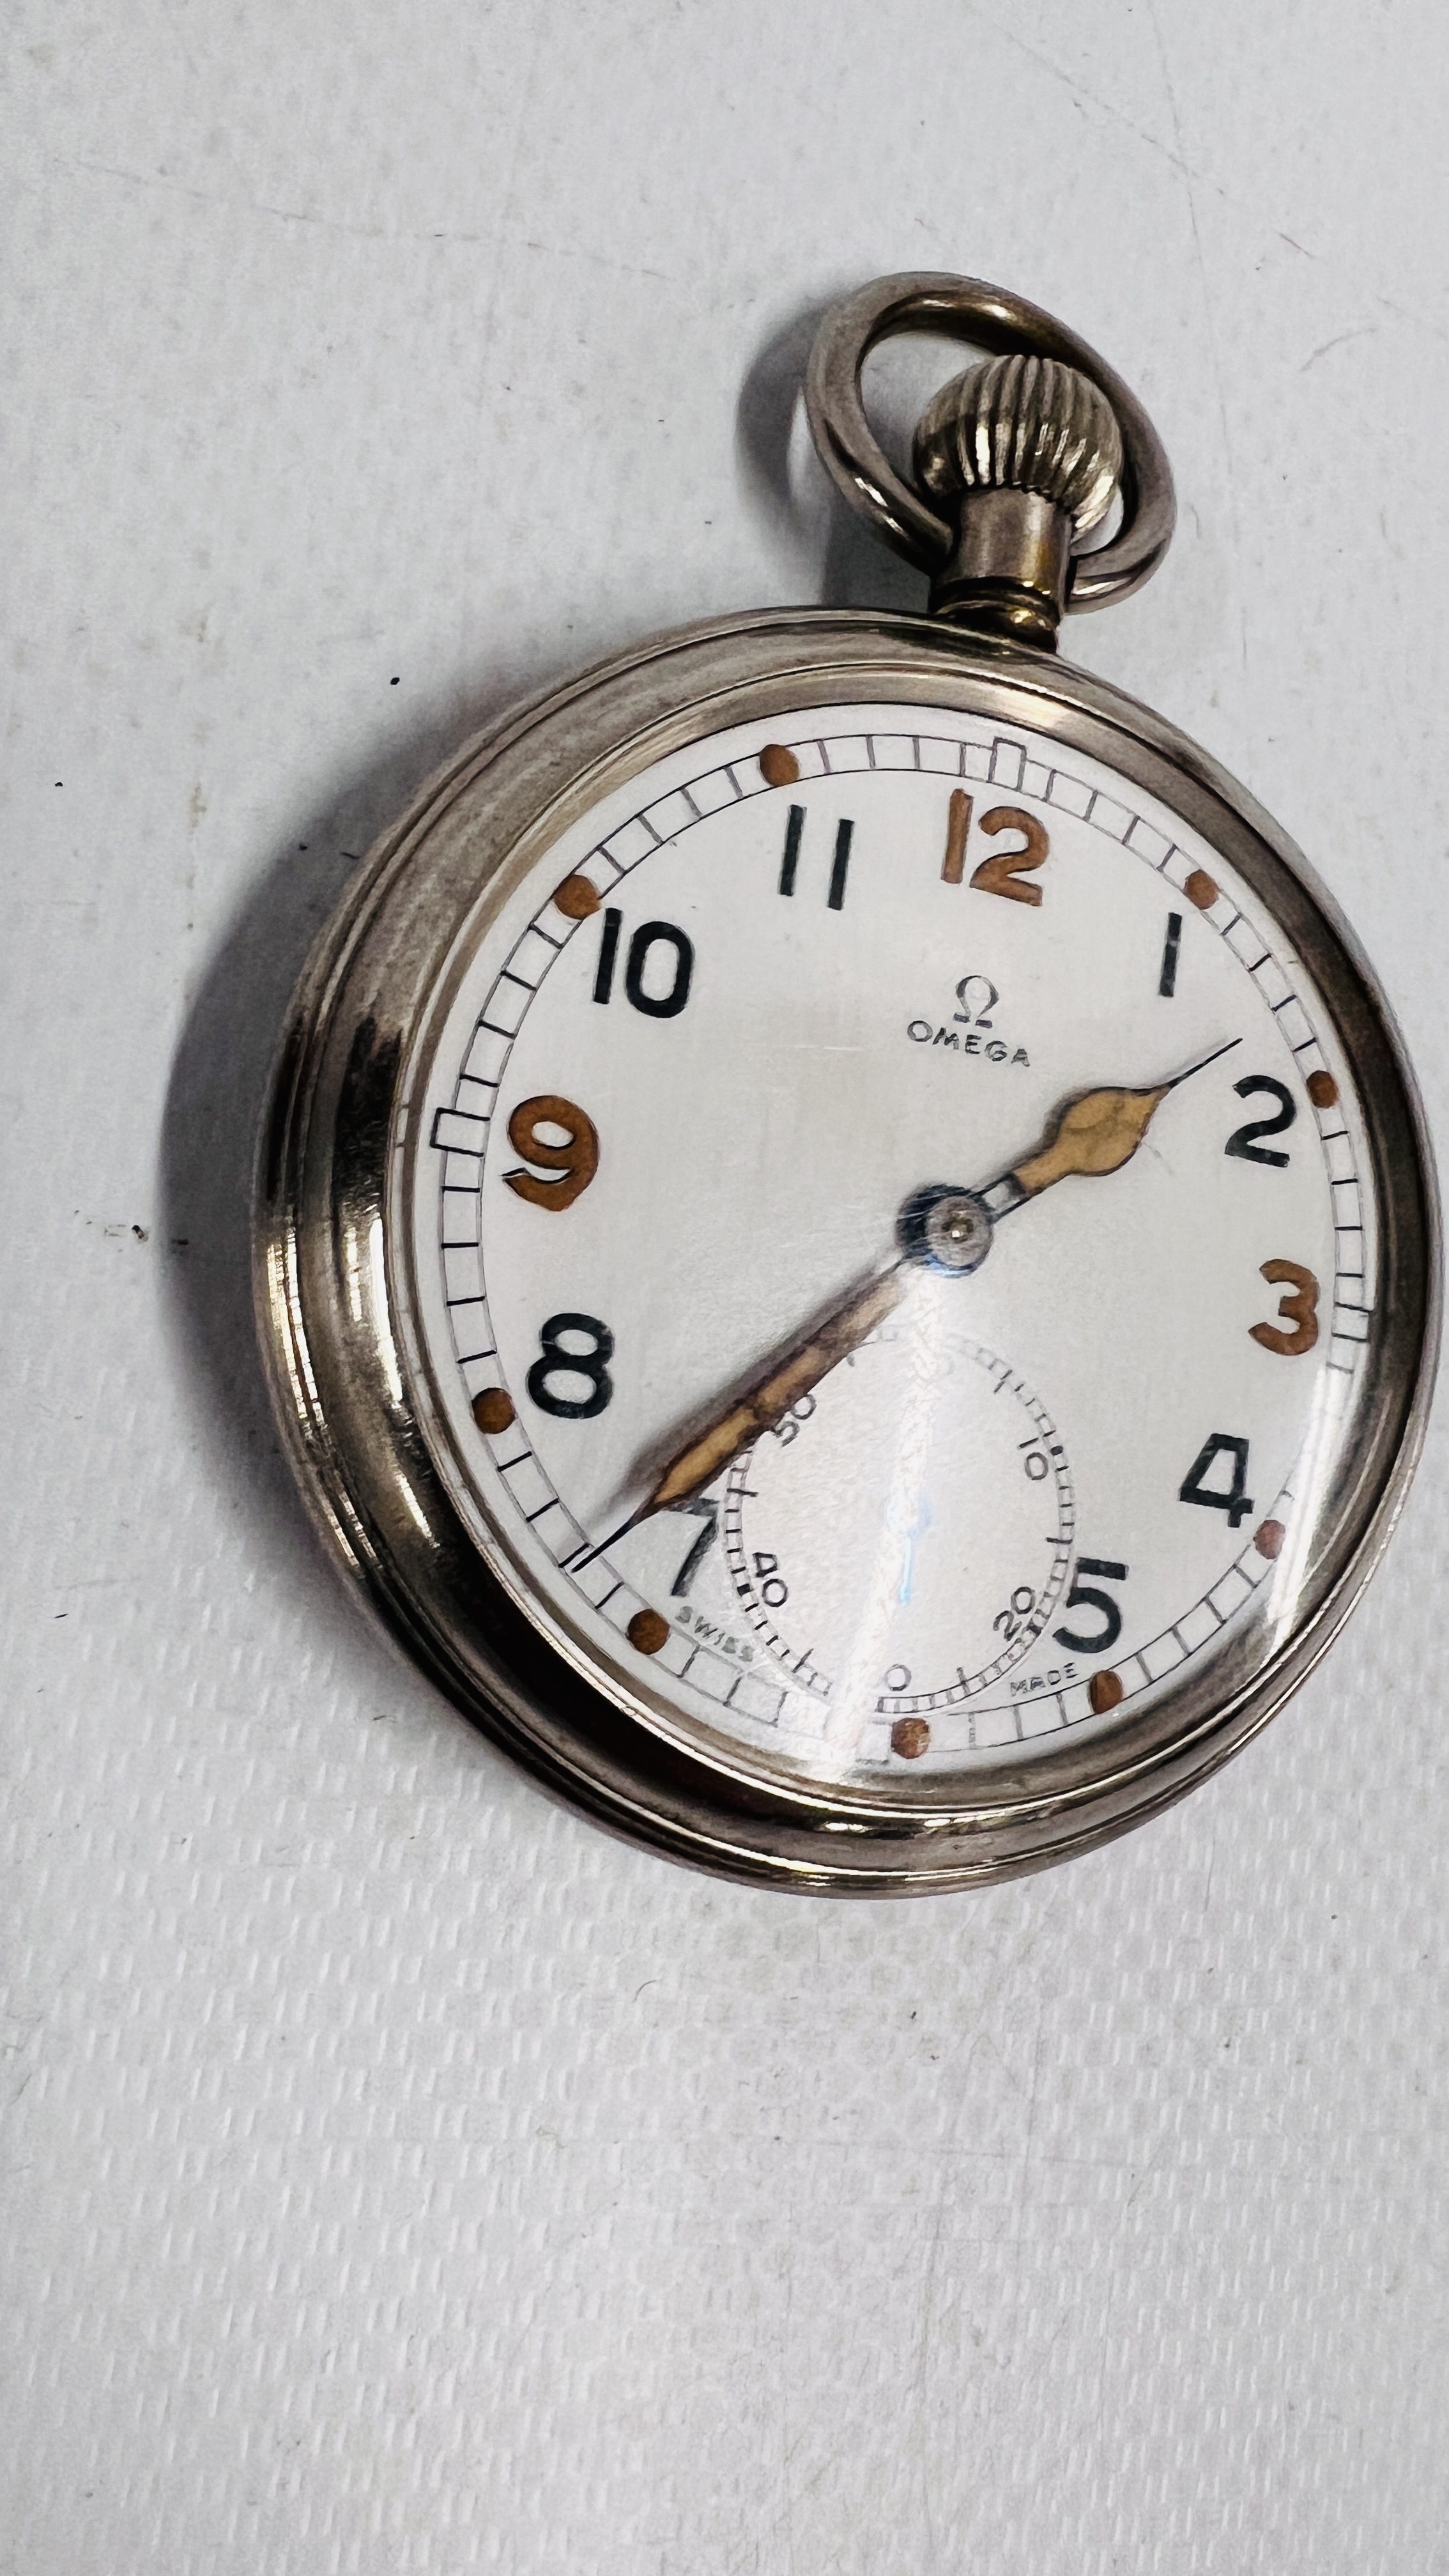 A VINTAGE MILITARY OMEGA POCKET WATCH G.S.T.P. FO51512. - Image 2 of 11